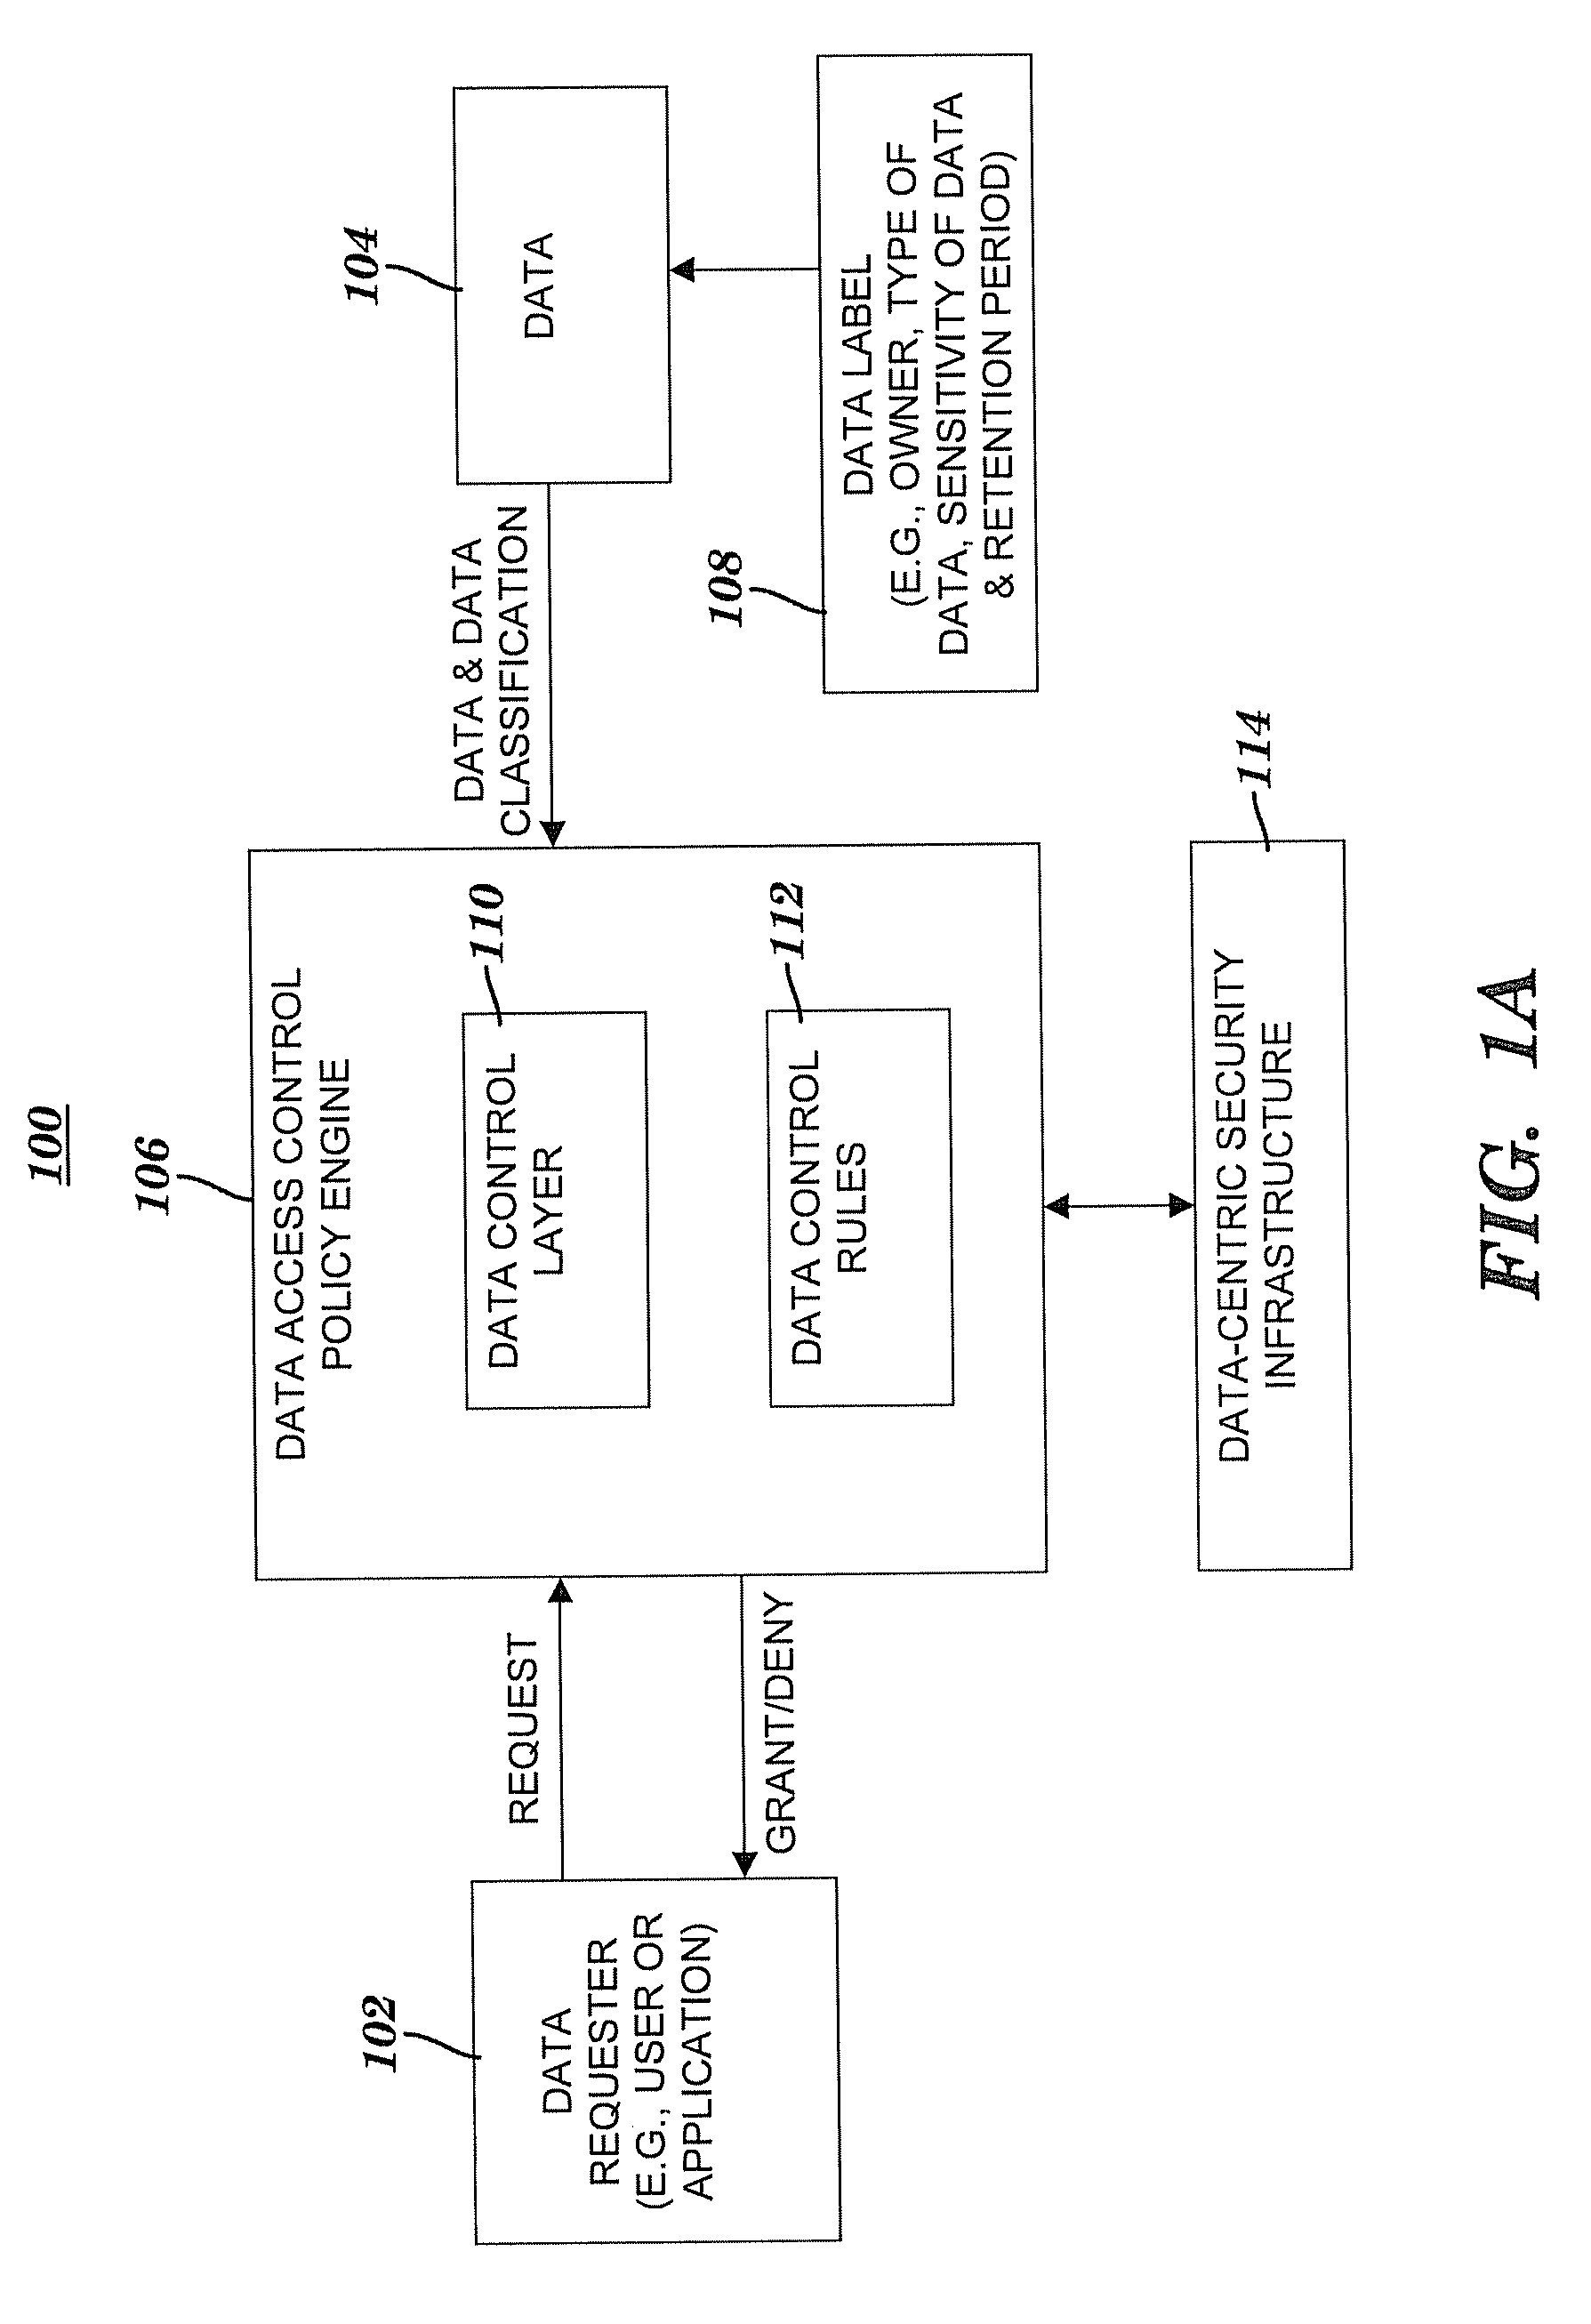 Method and system for controlling access to data via a data-centric security model